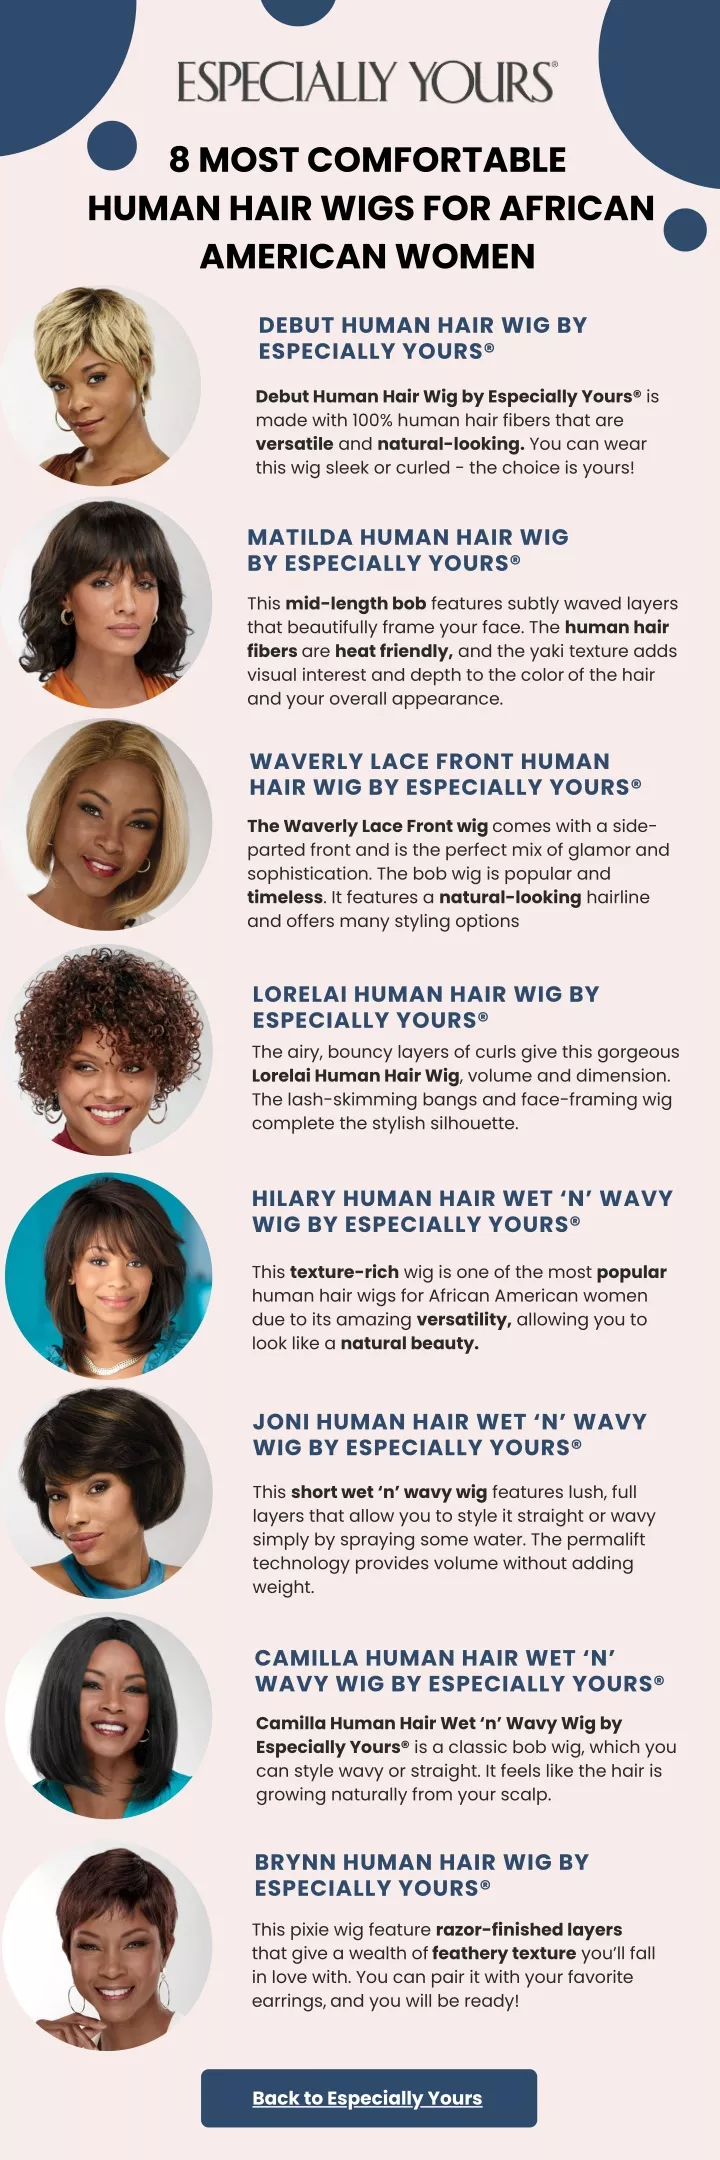 8 most comfortable human hair wigs for african